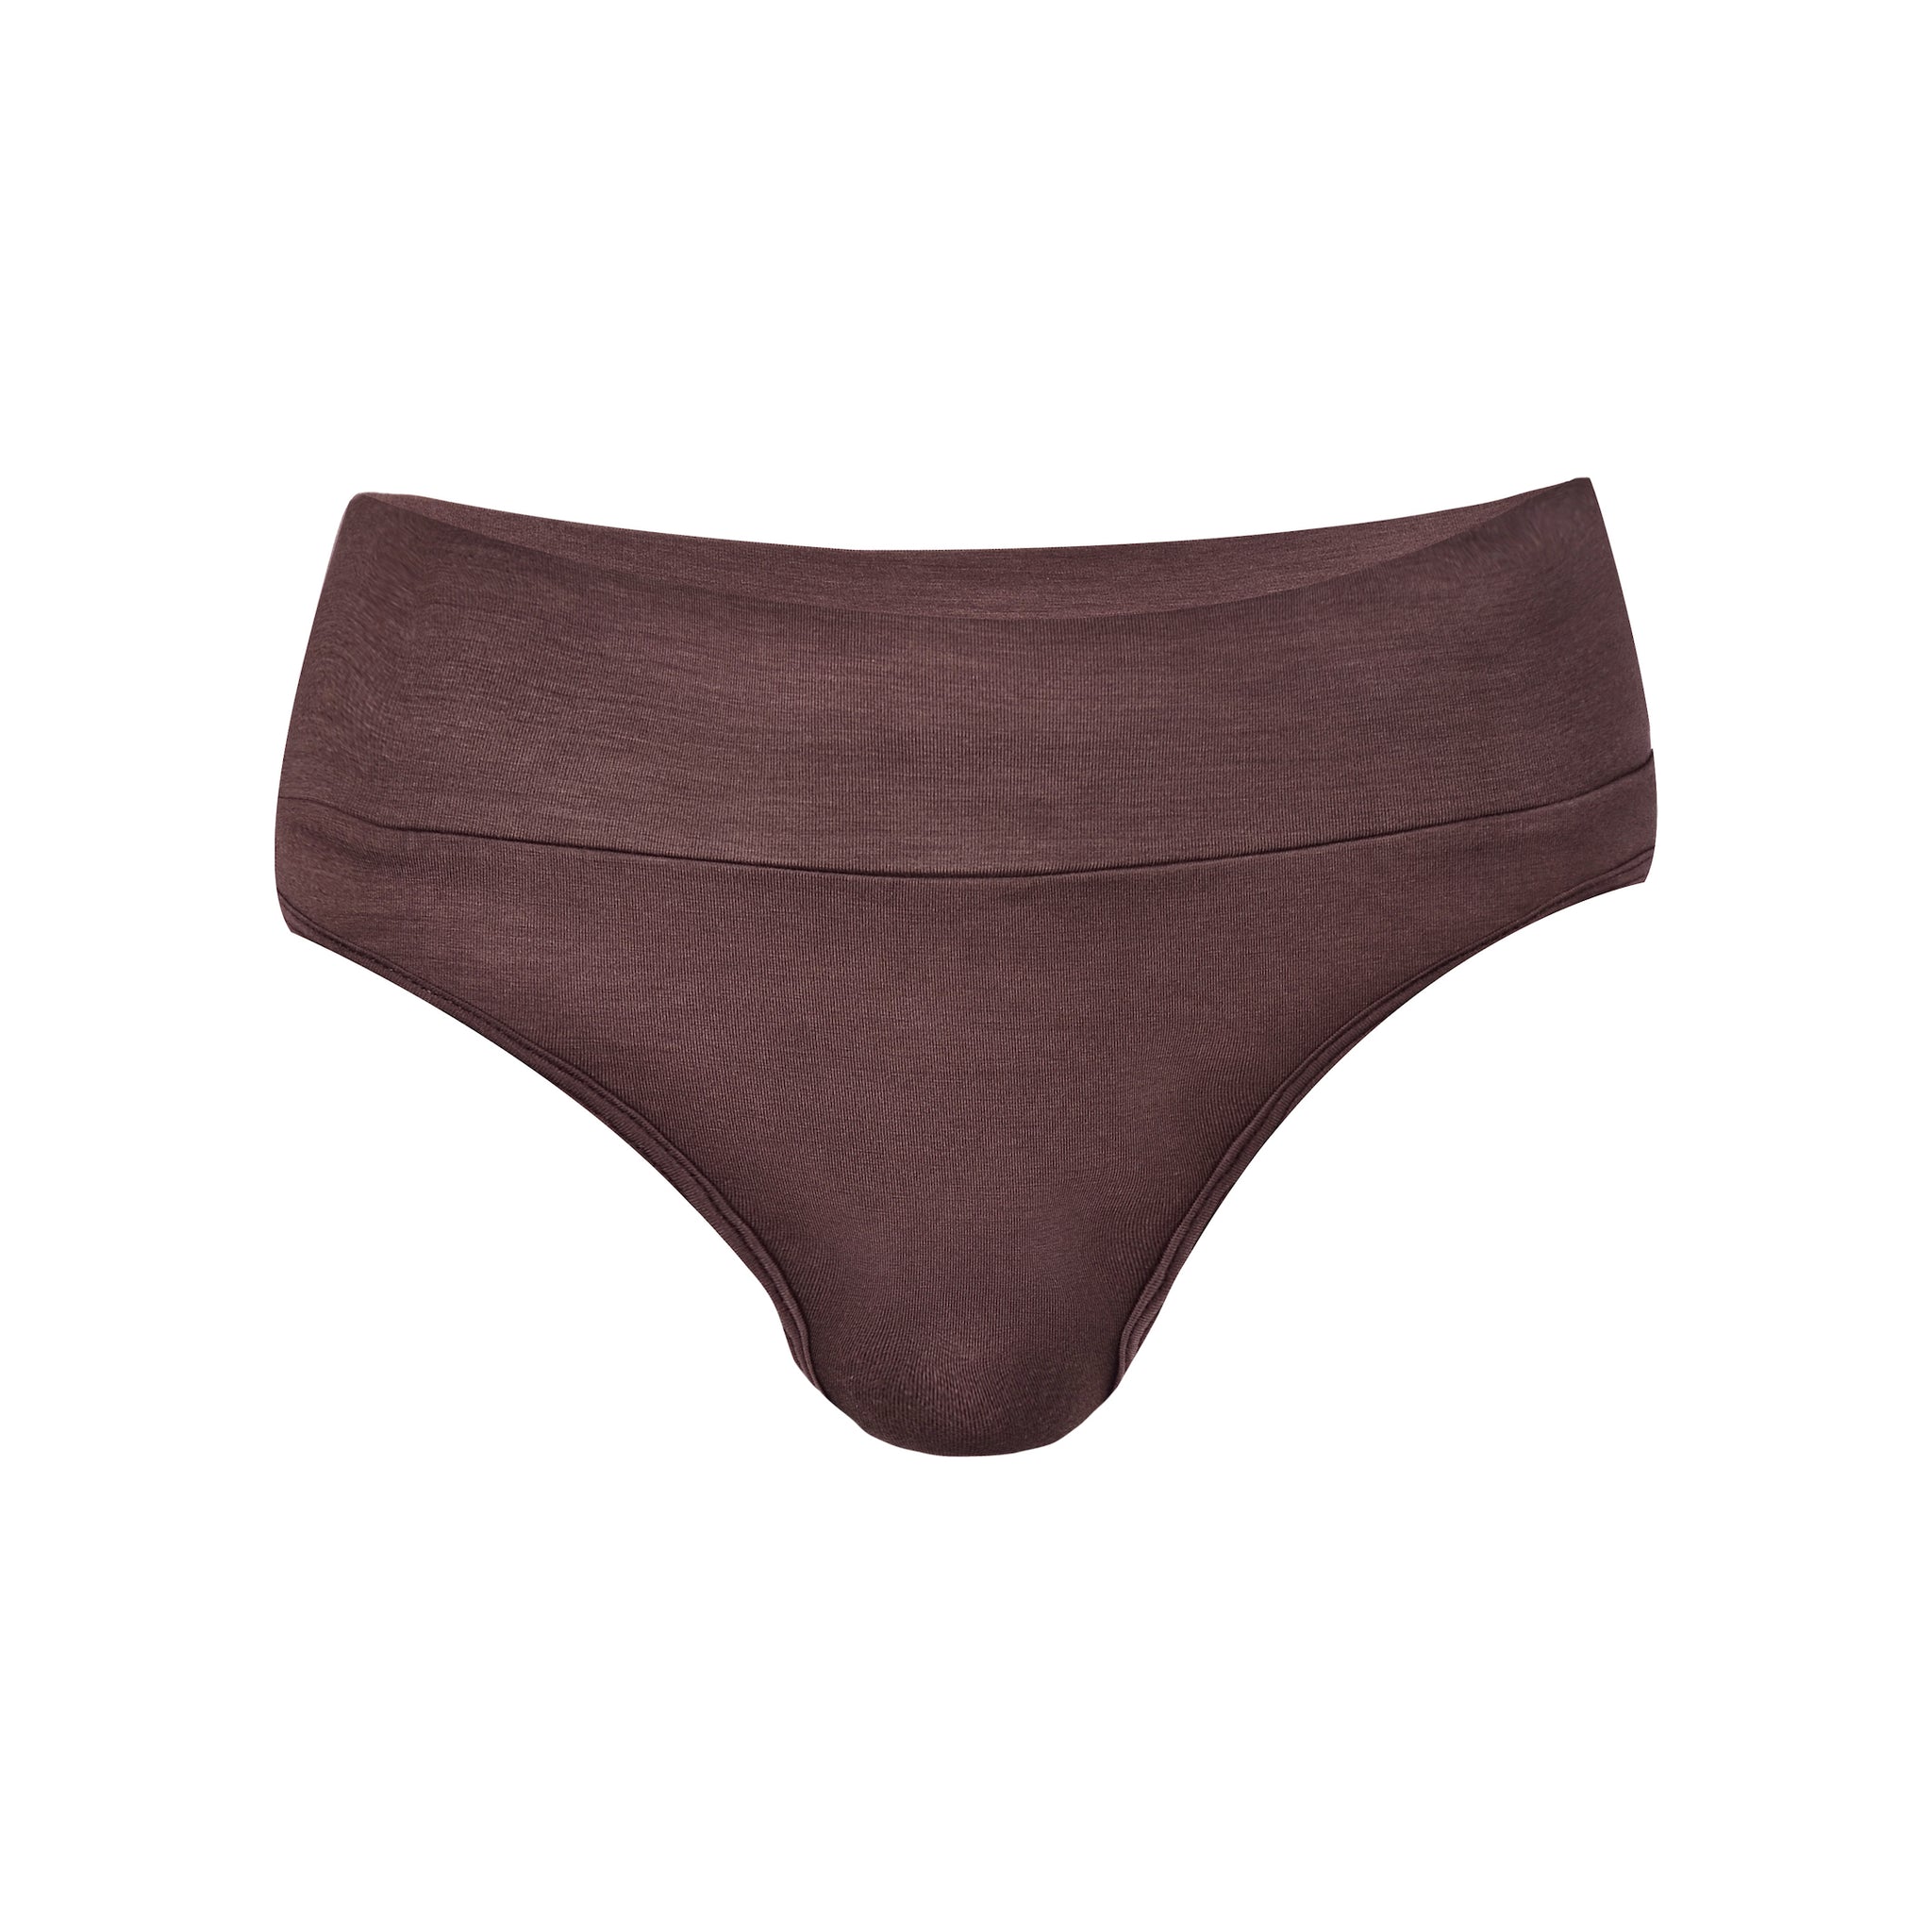 Serenity Panty Chocolate - INTIMATES THIS IS A LOVE SONG